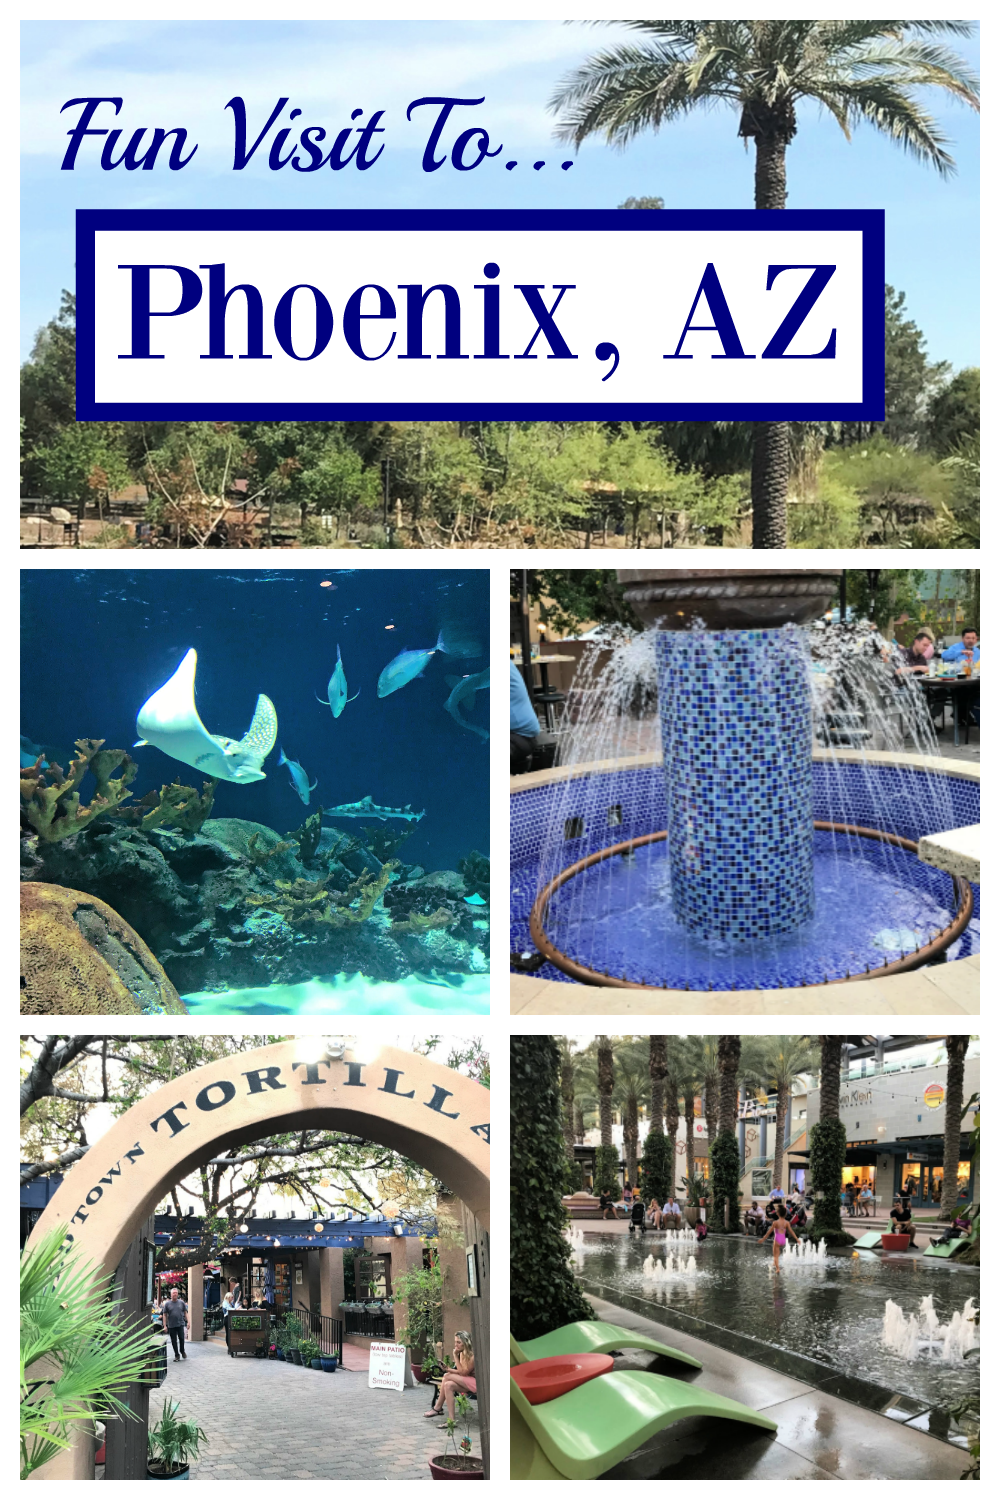 Fun things to do in Phoenix! Plan the perfect Phoenix vacation for your family! Fun vacation tips and tricks. #phoenix #phoenixvacation #funvacationforkids #kidsvacation #phoenixwithkids